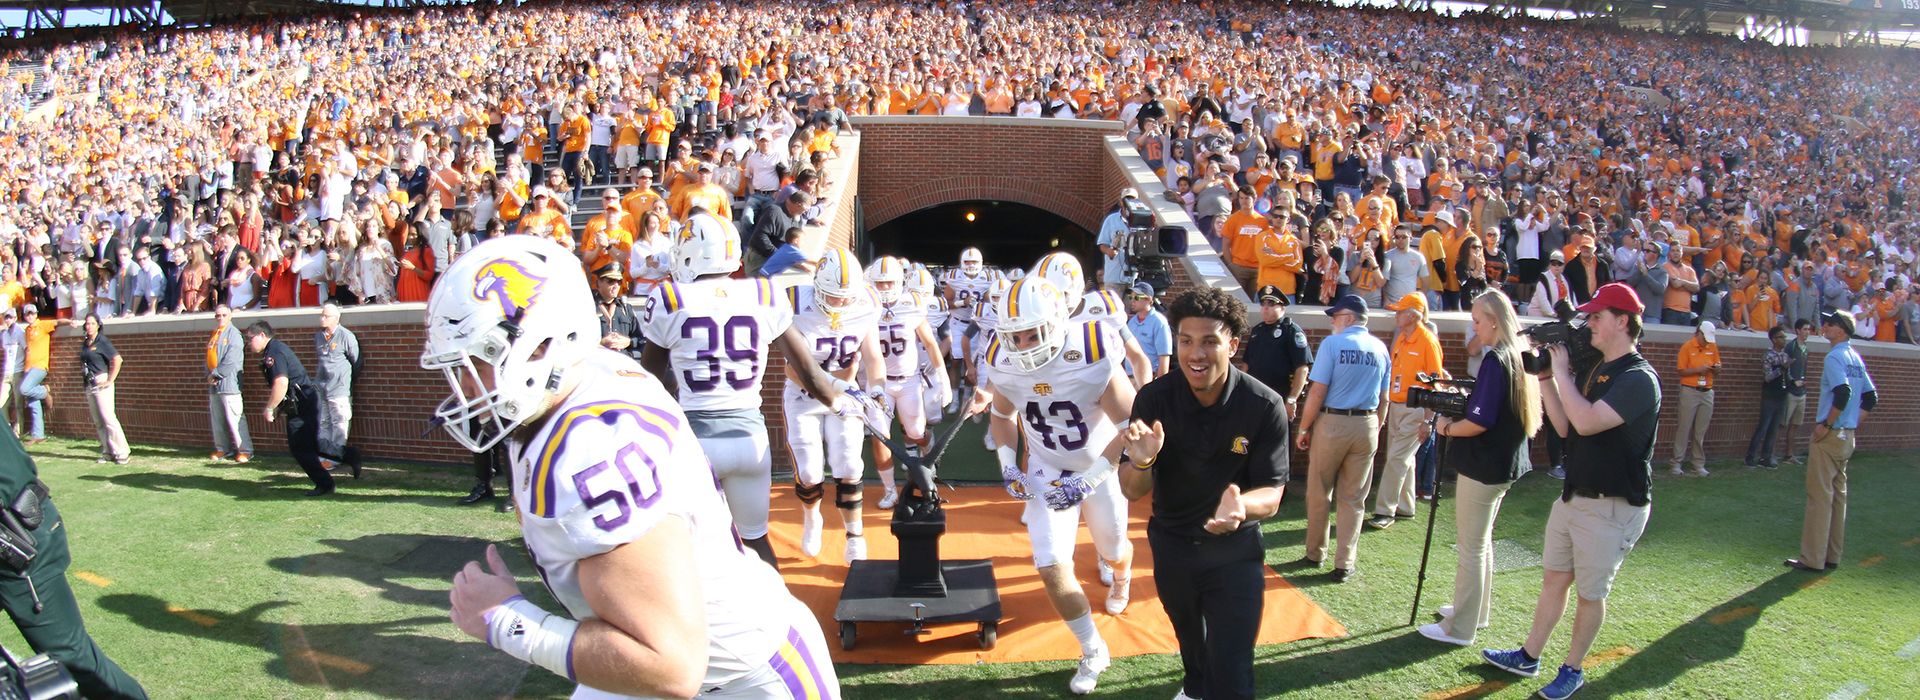 Clear bag policy in effect at Neyland Stadium for TTU at UT